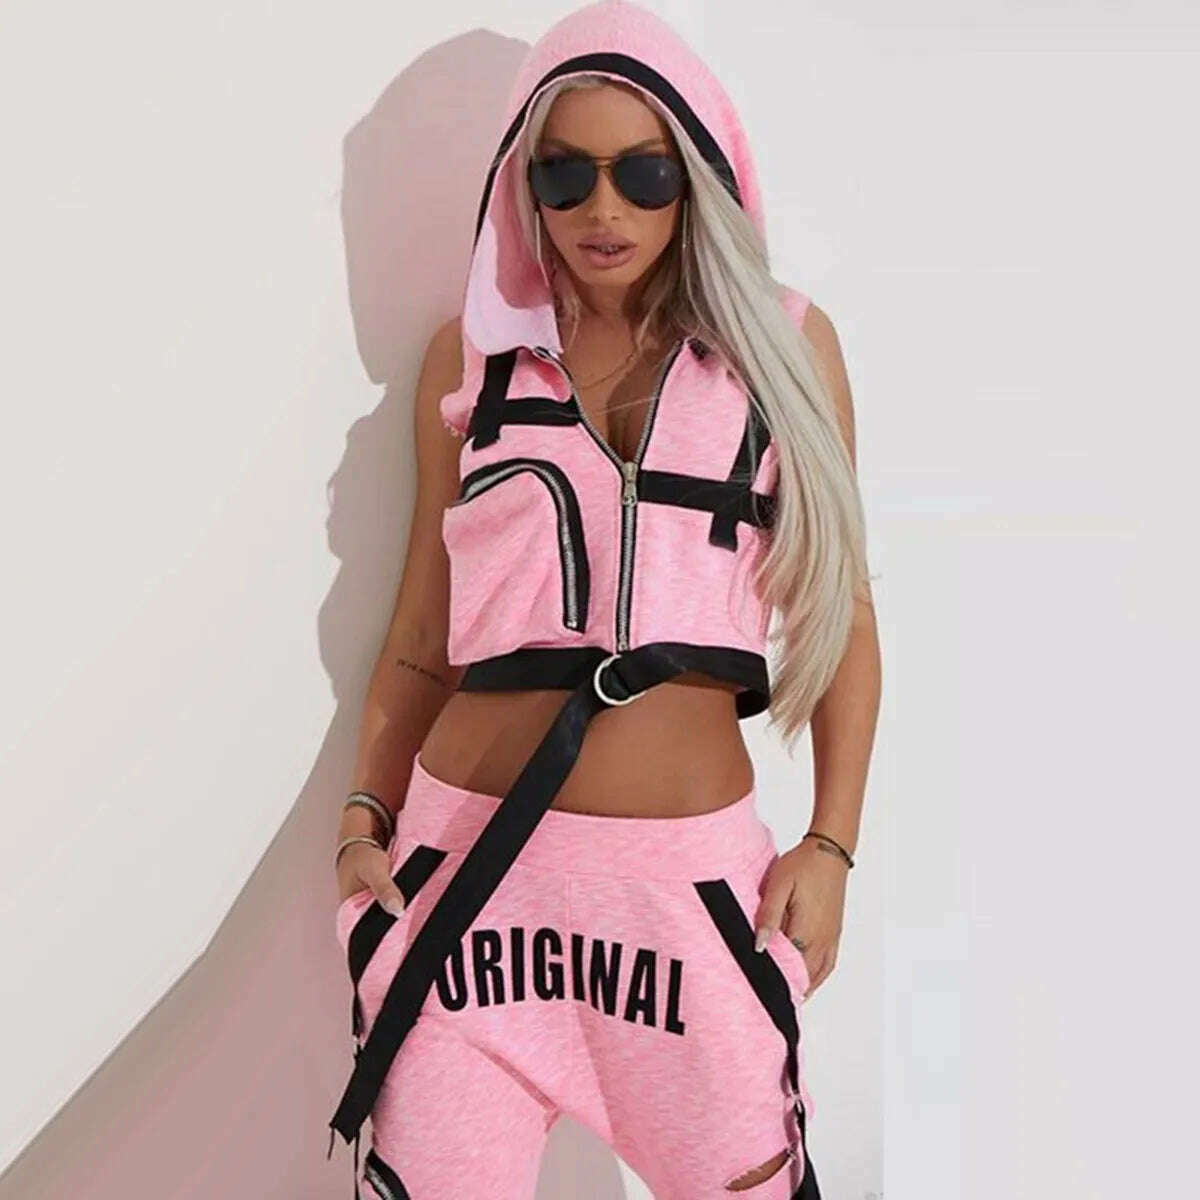 KIMLUD, Oshoplive Fashion Hooded Zipper Vest&amp;Hole Pants Suits Women Casual Spring&amp;Autumn Sportswear Sleeveless Sweatpants For Women, PINK / S, KIMLUD Women's Clothes